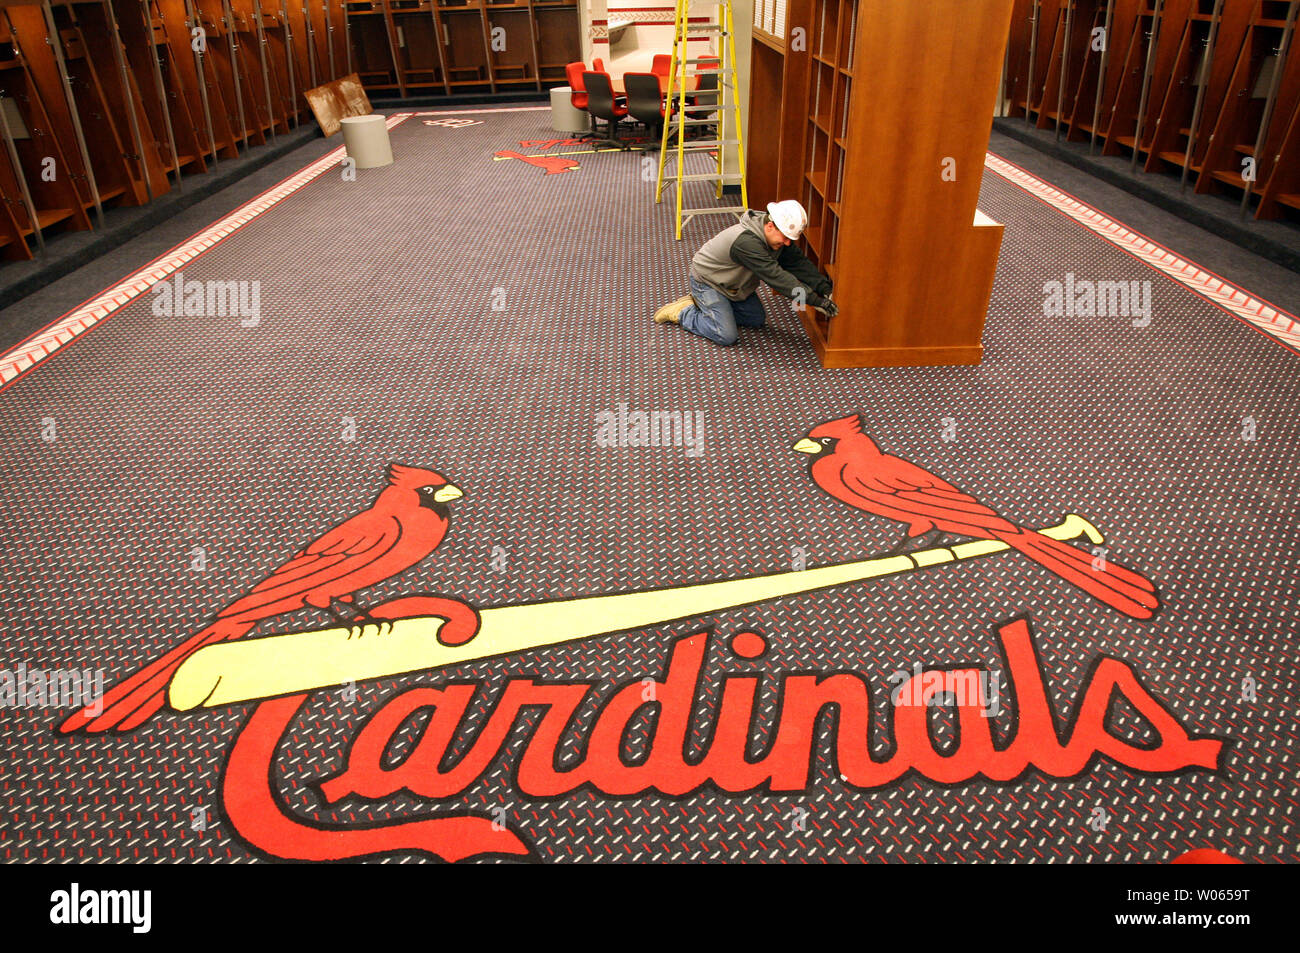 Construction worker Keith Stewart tucks in wires in the St. Louis Cardinals  locker room at the new Busch Stadium on March 3, 2006. Work continues on a  24-hour basis as preperations are